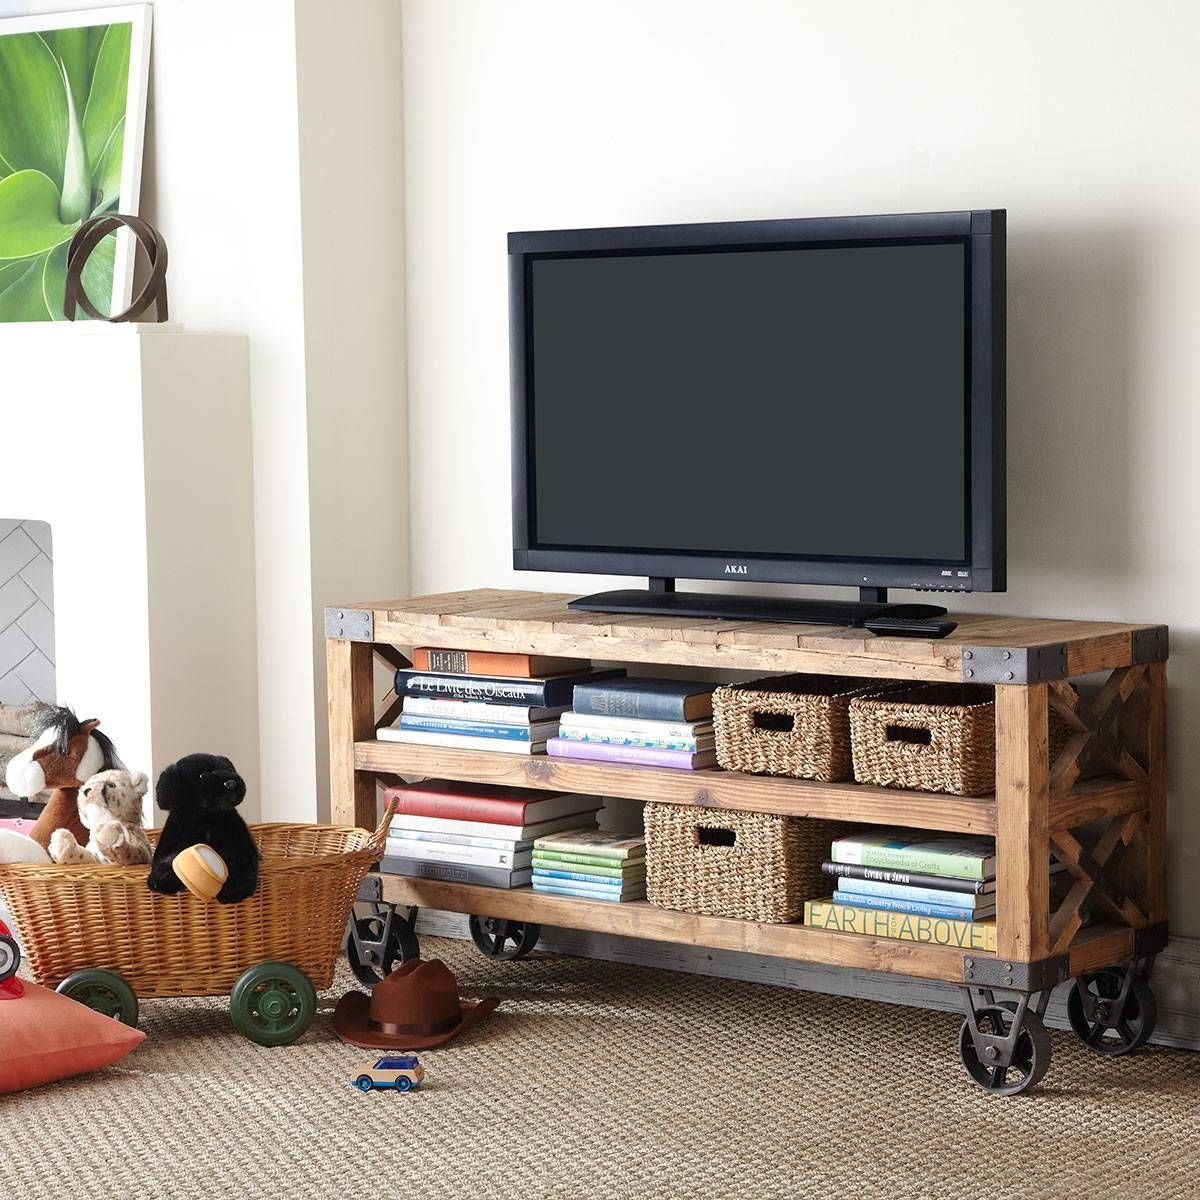 Cool Homemade Industrial Tv Stands With Wheels Made From Reclaimed Intended For Tv Stands And Bookshelf (View 13 of 15)